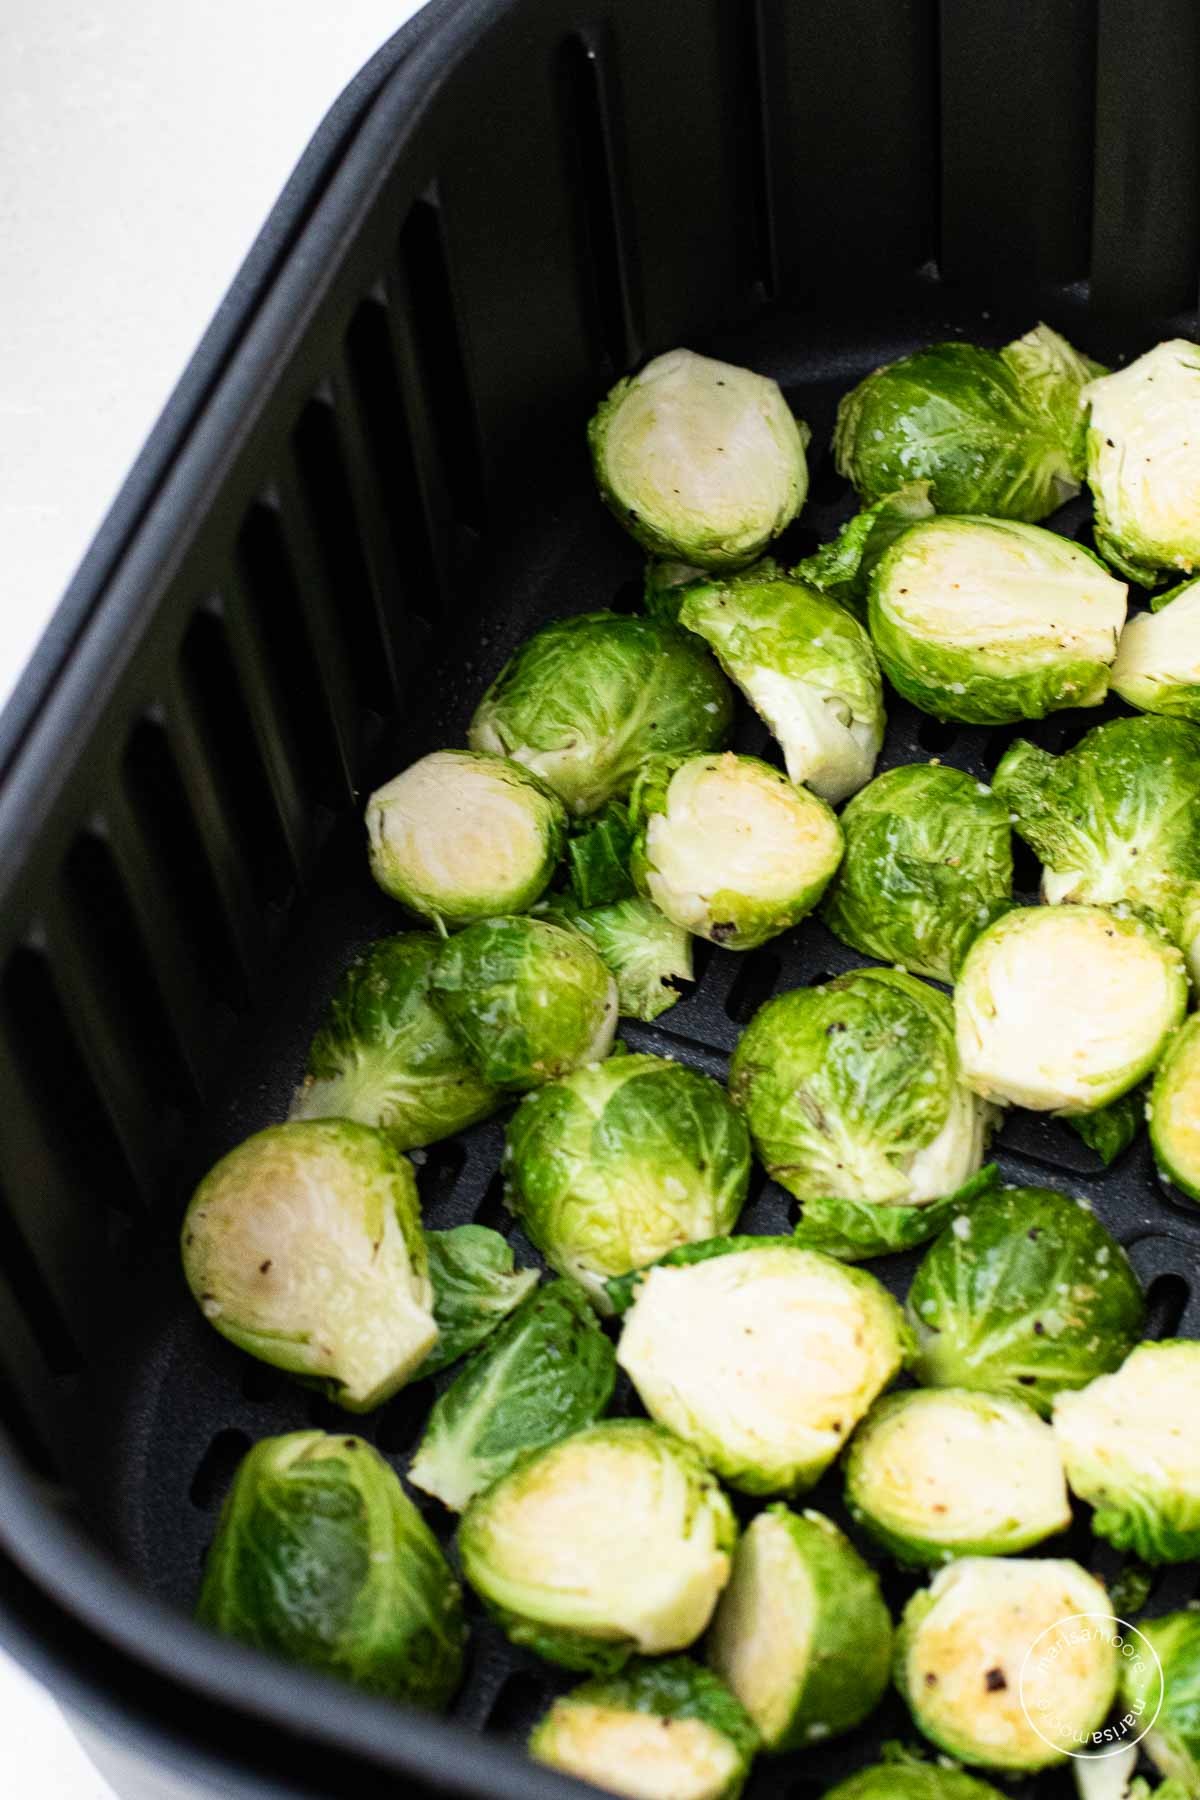 Sliced brussels sprouts in single layer in an air fryer basket